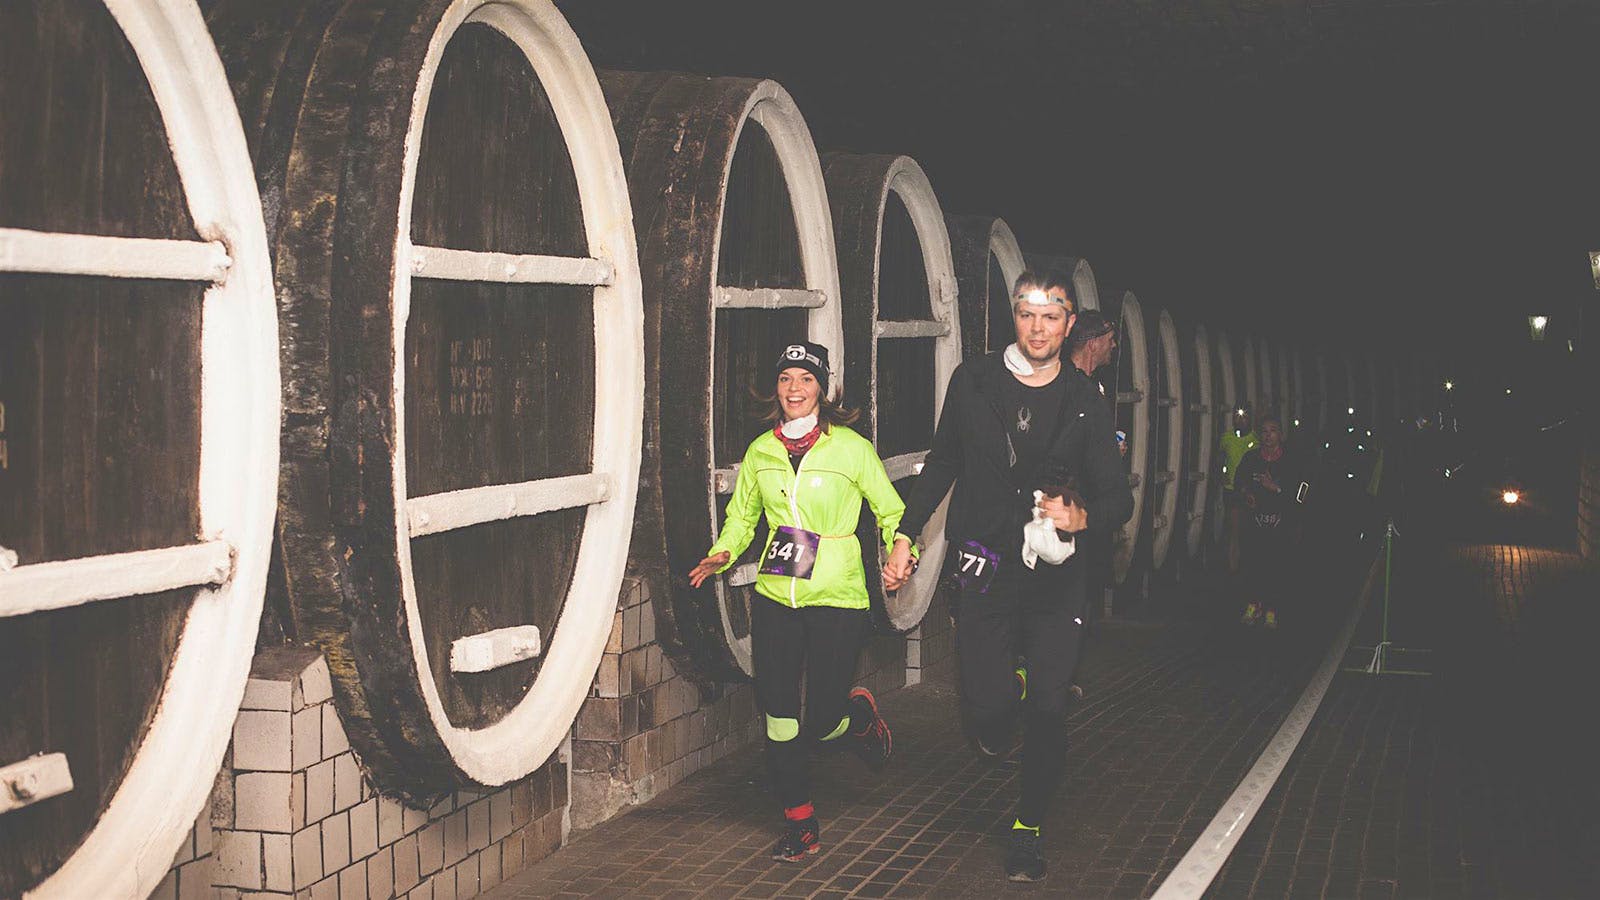 The 10K Race Through the World's Largest Wine Cellar